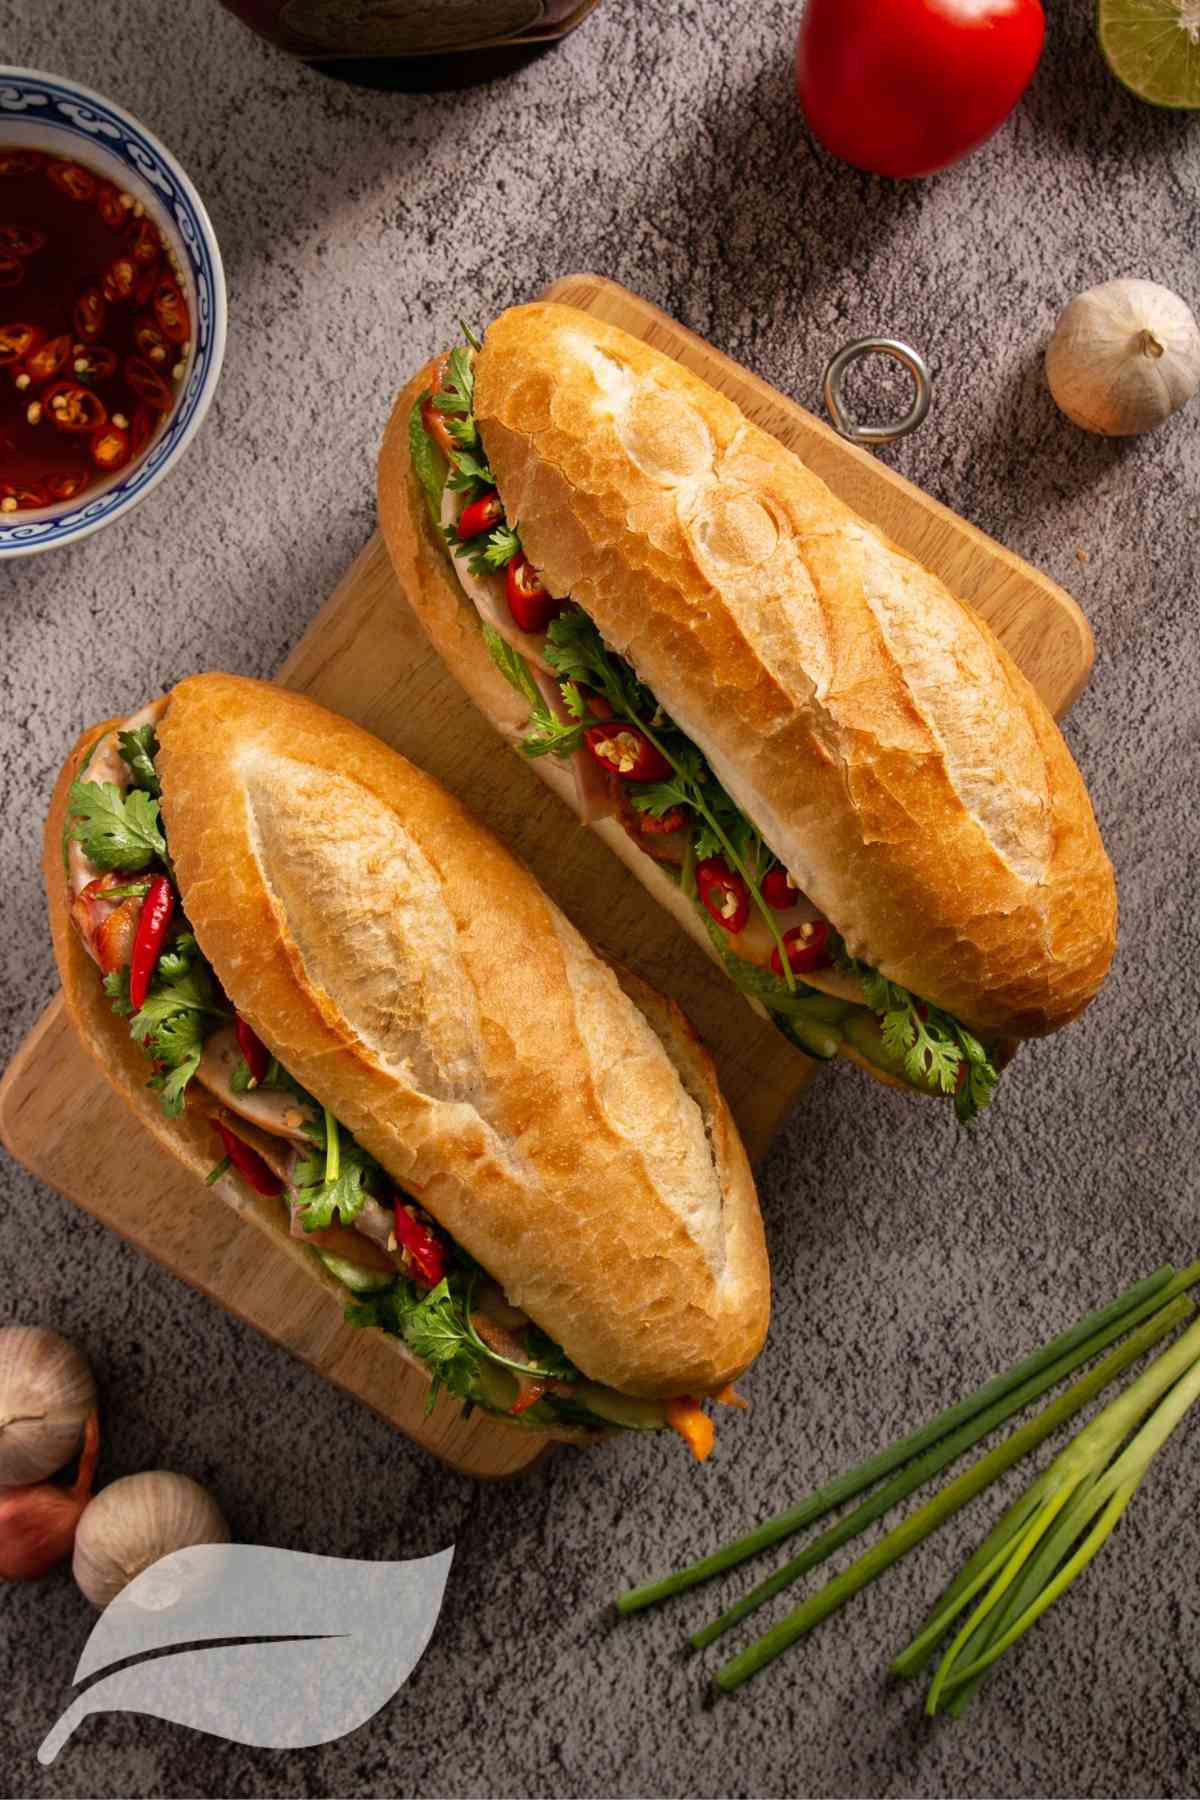 Two Vietnamese Pork sandwiches in a bread stick with salad